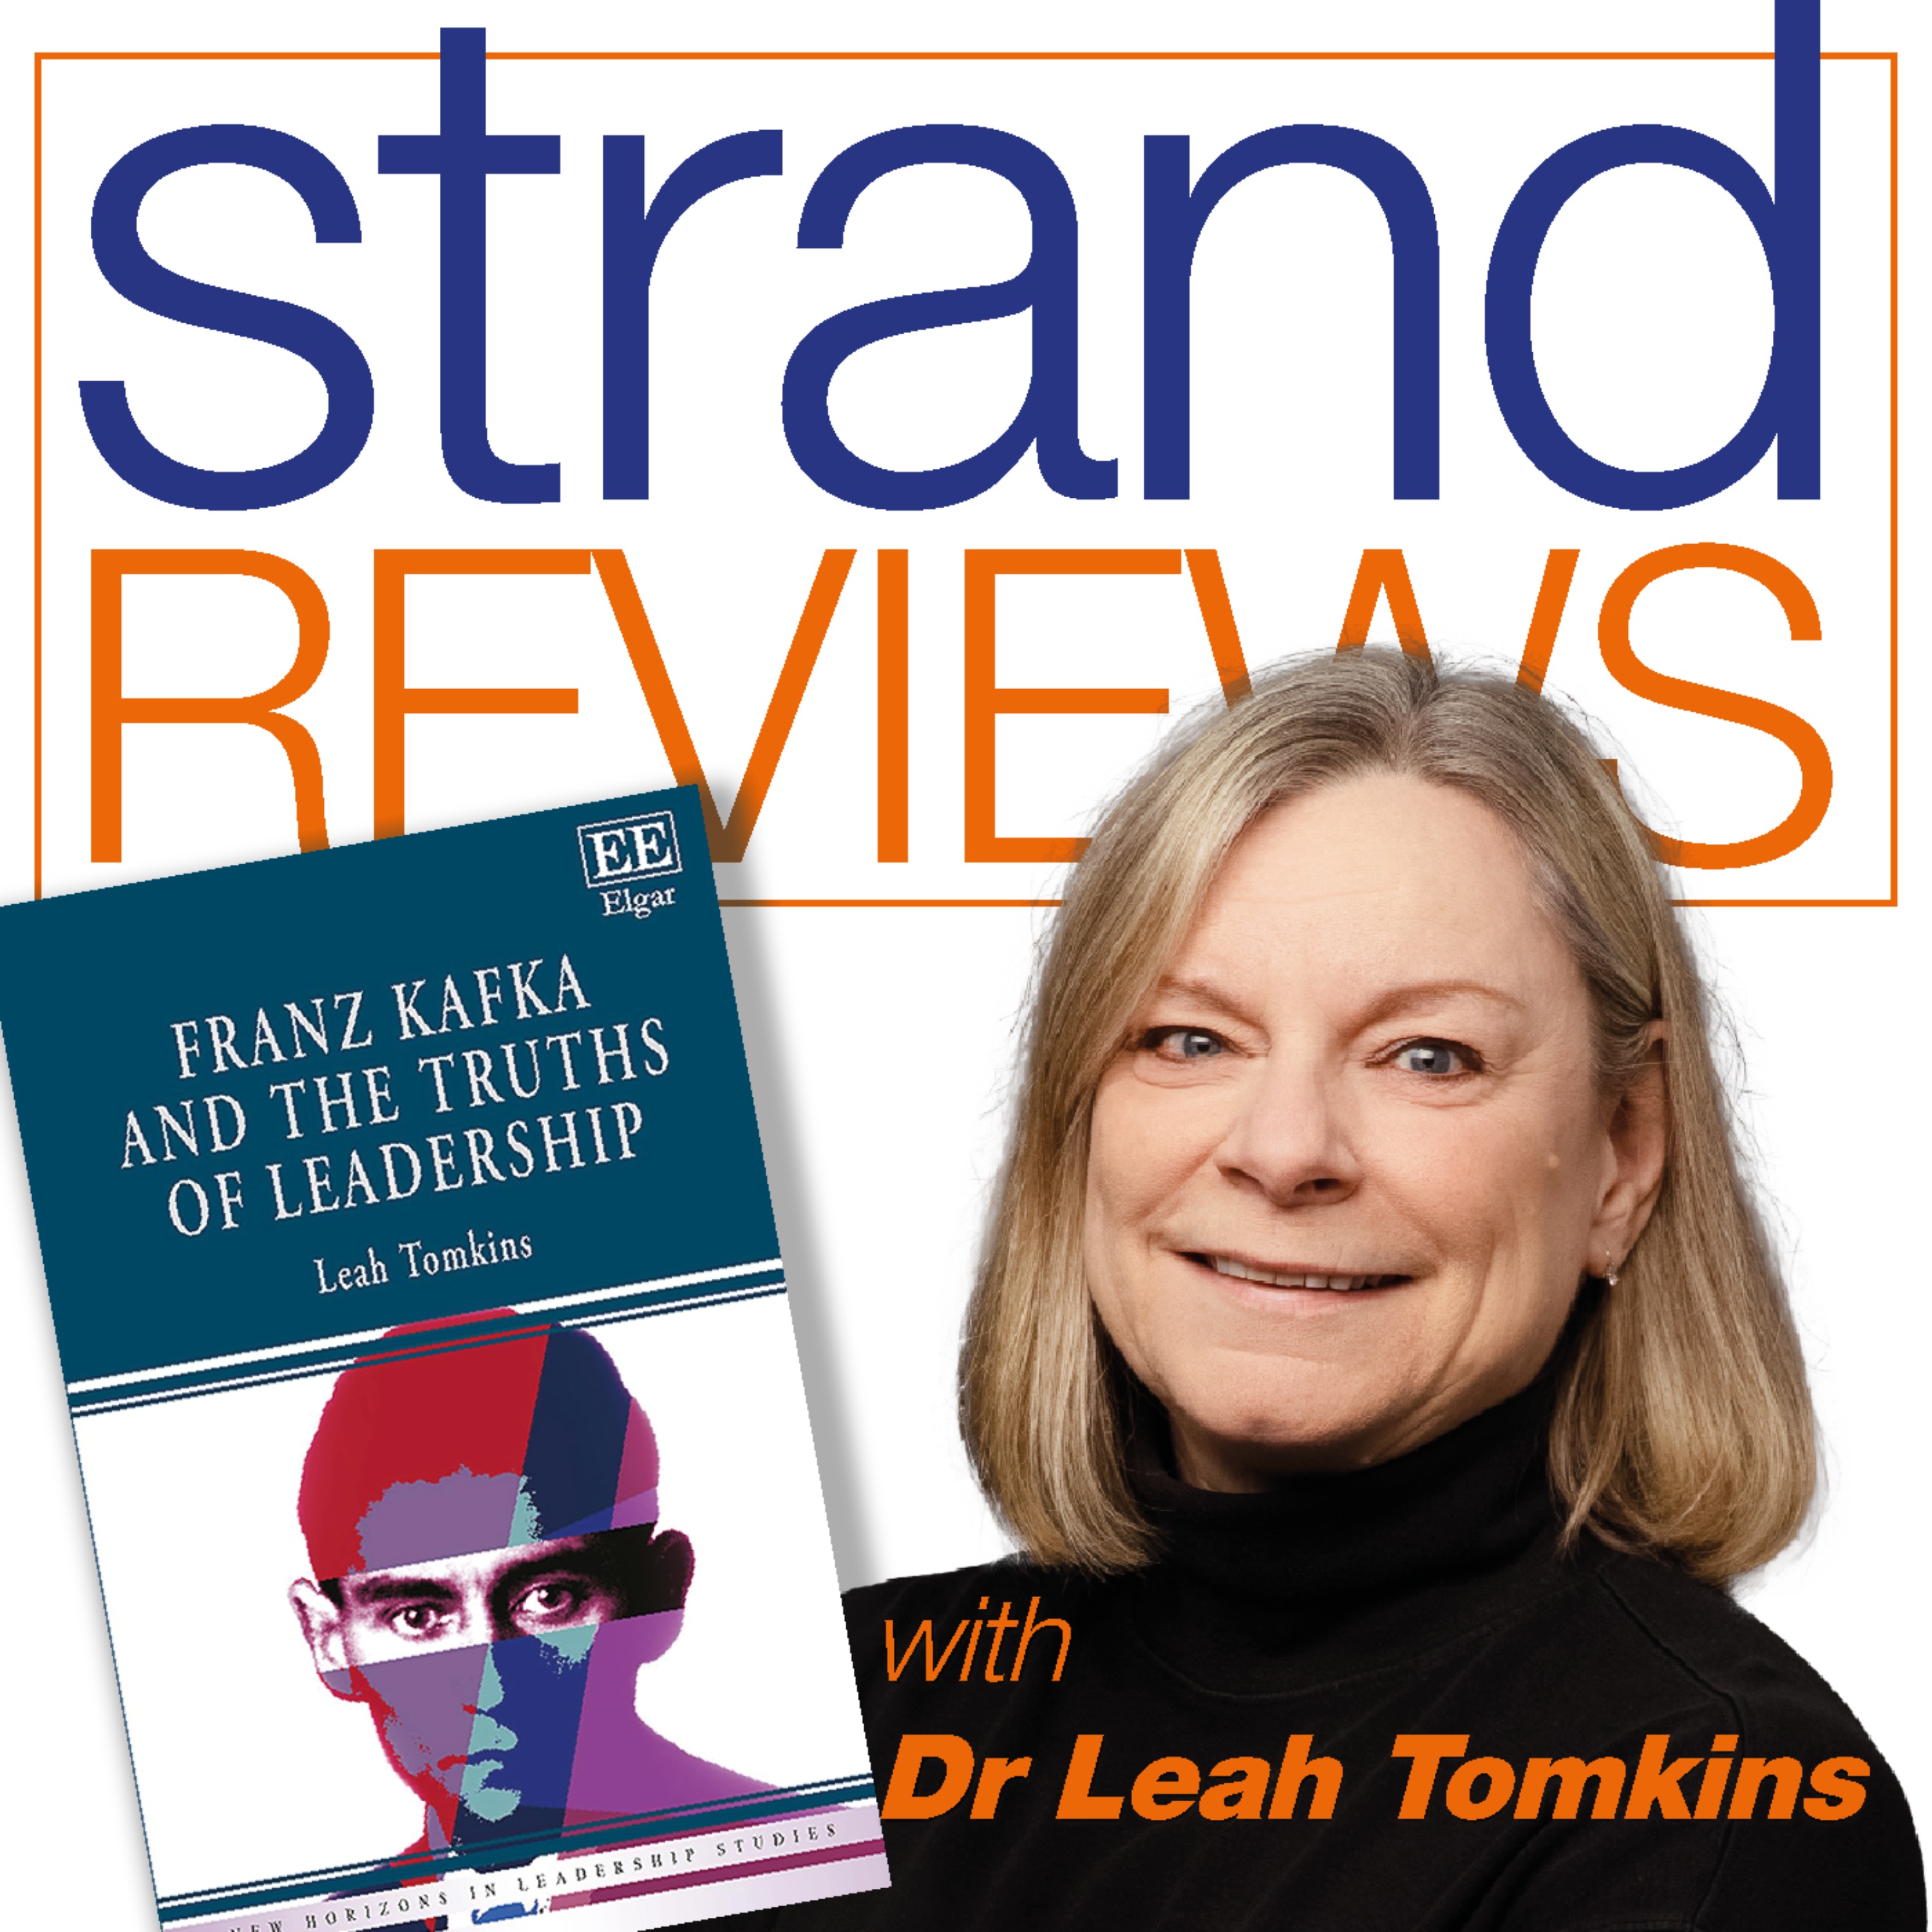 cover art for Franz Kafka and the Truths of Leadership, with the author, Dr Leah Tomkins